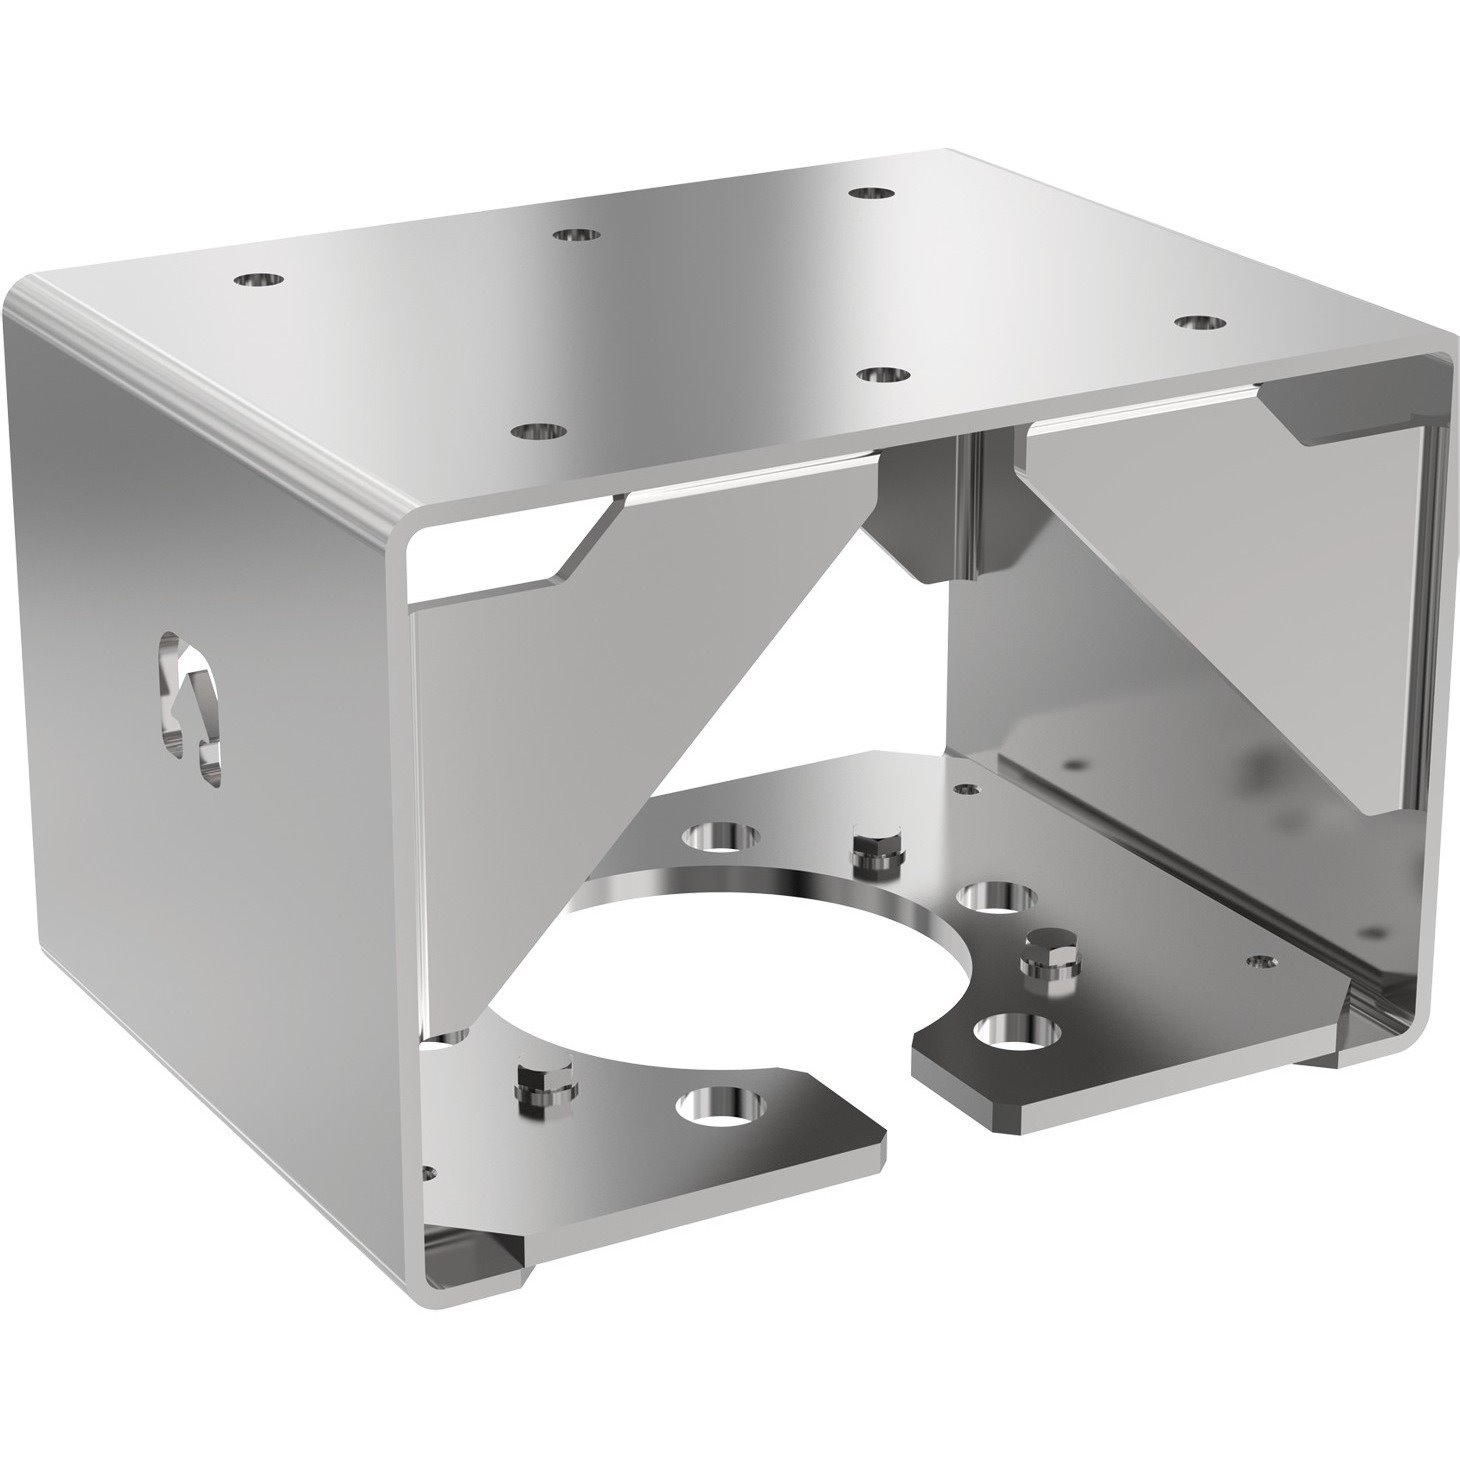 AXIS Mounting Bracket for Network Camera